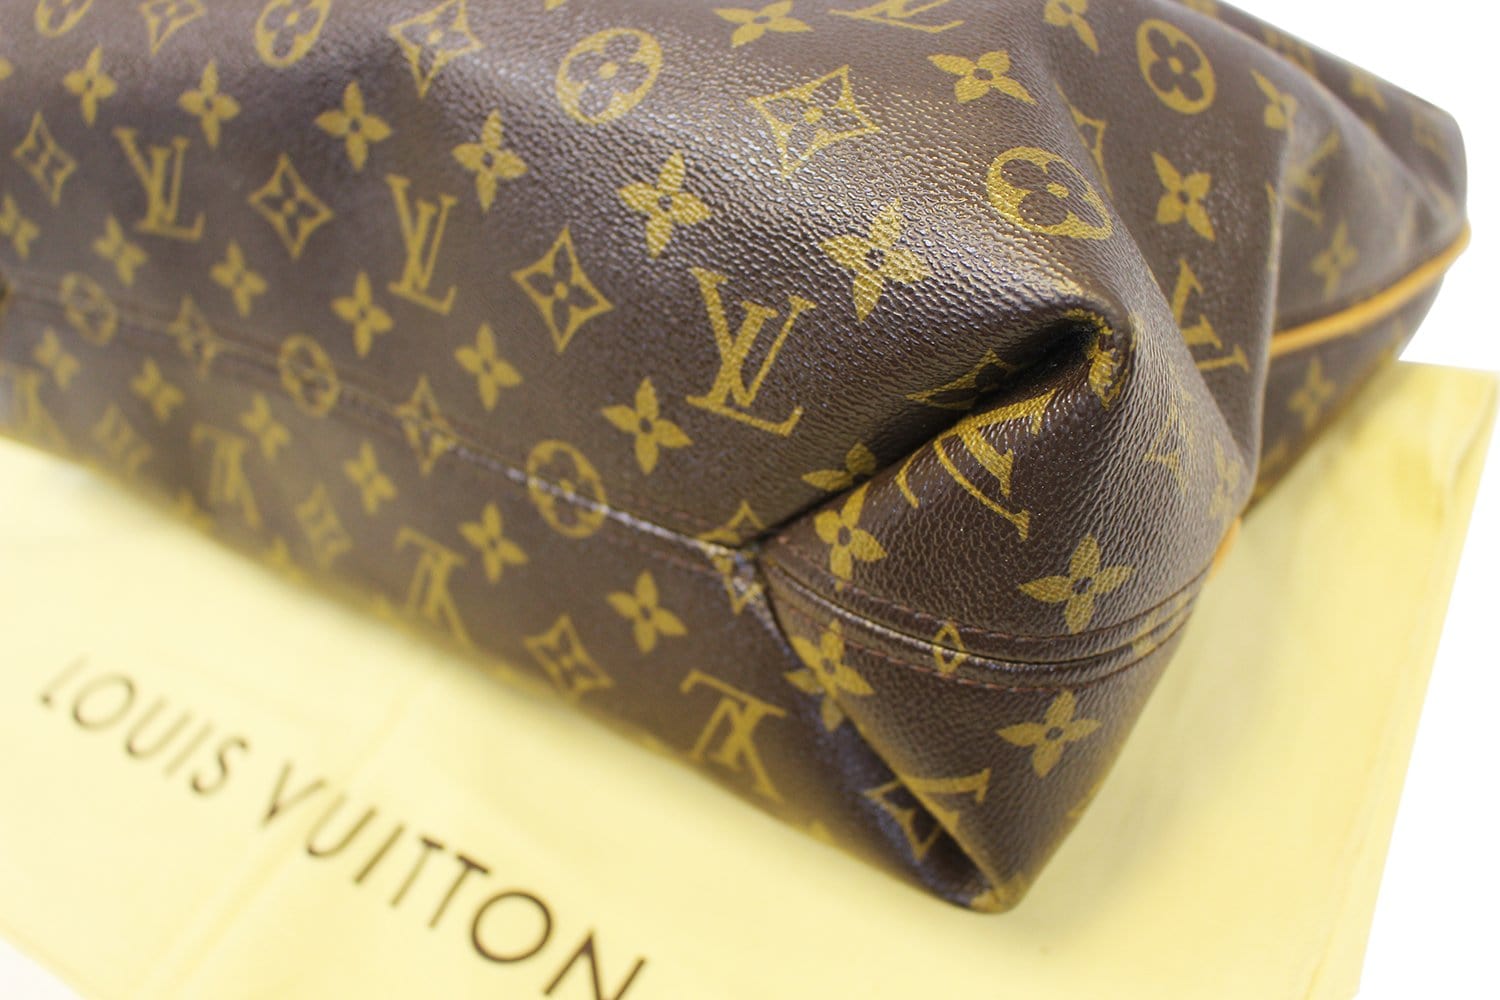 Pre-owned Louis Vuitton Leather Shoulder Bag In Brown